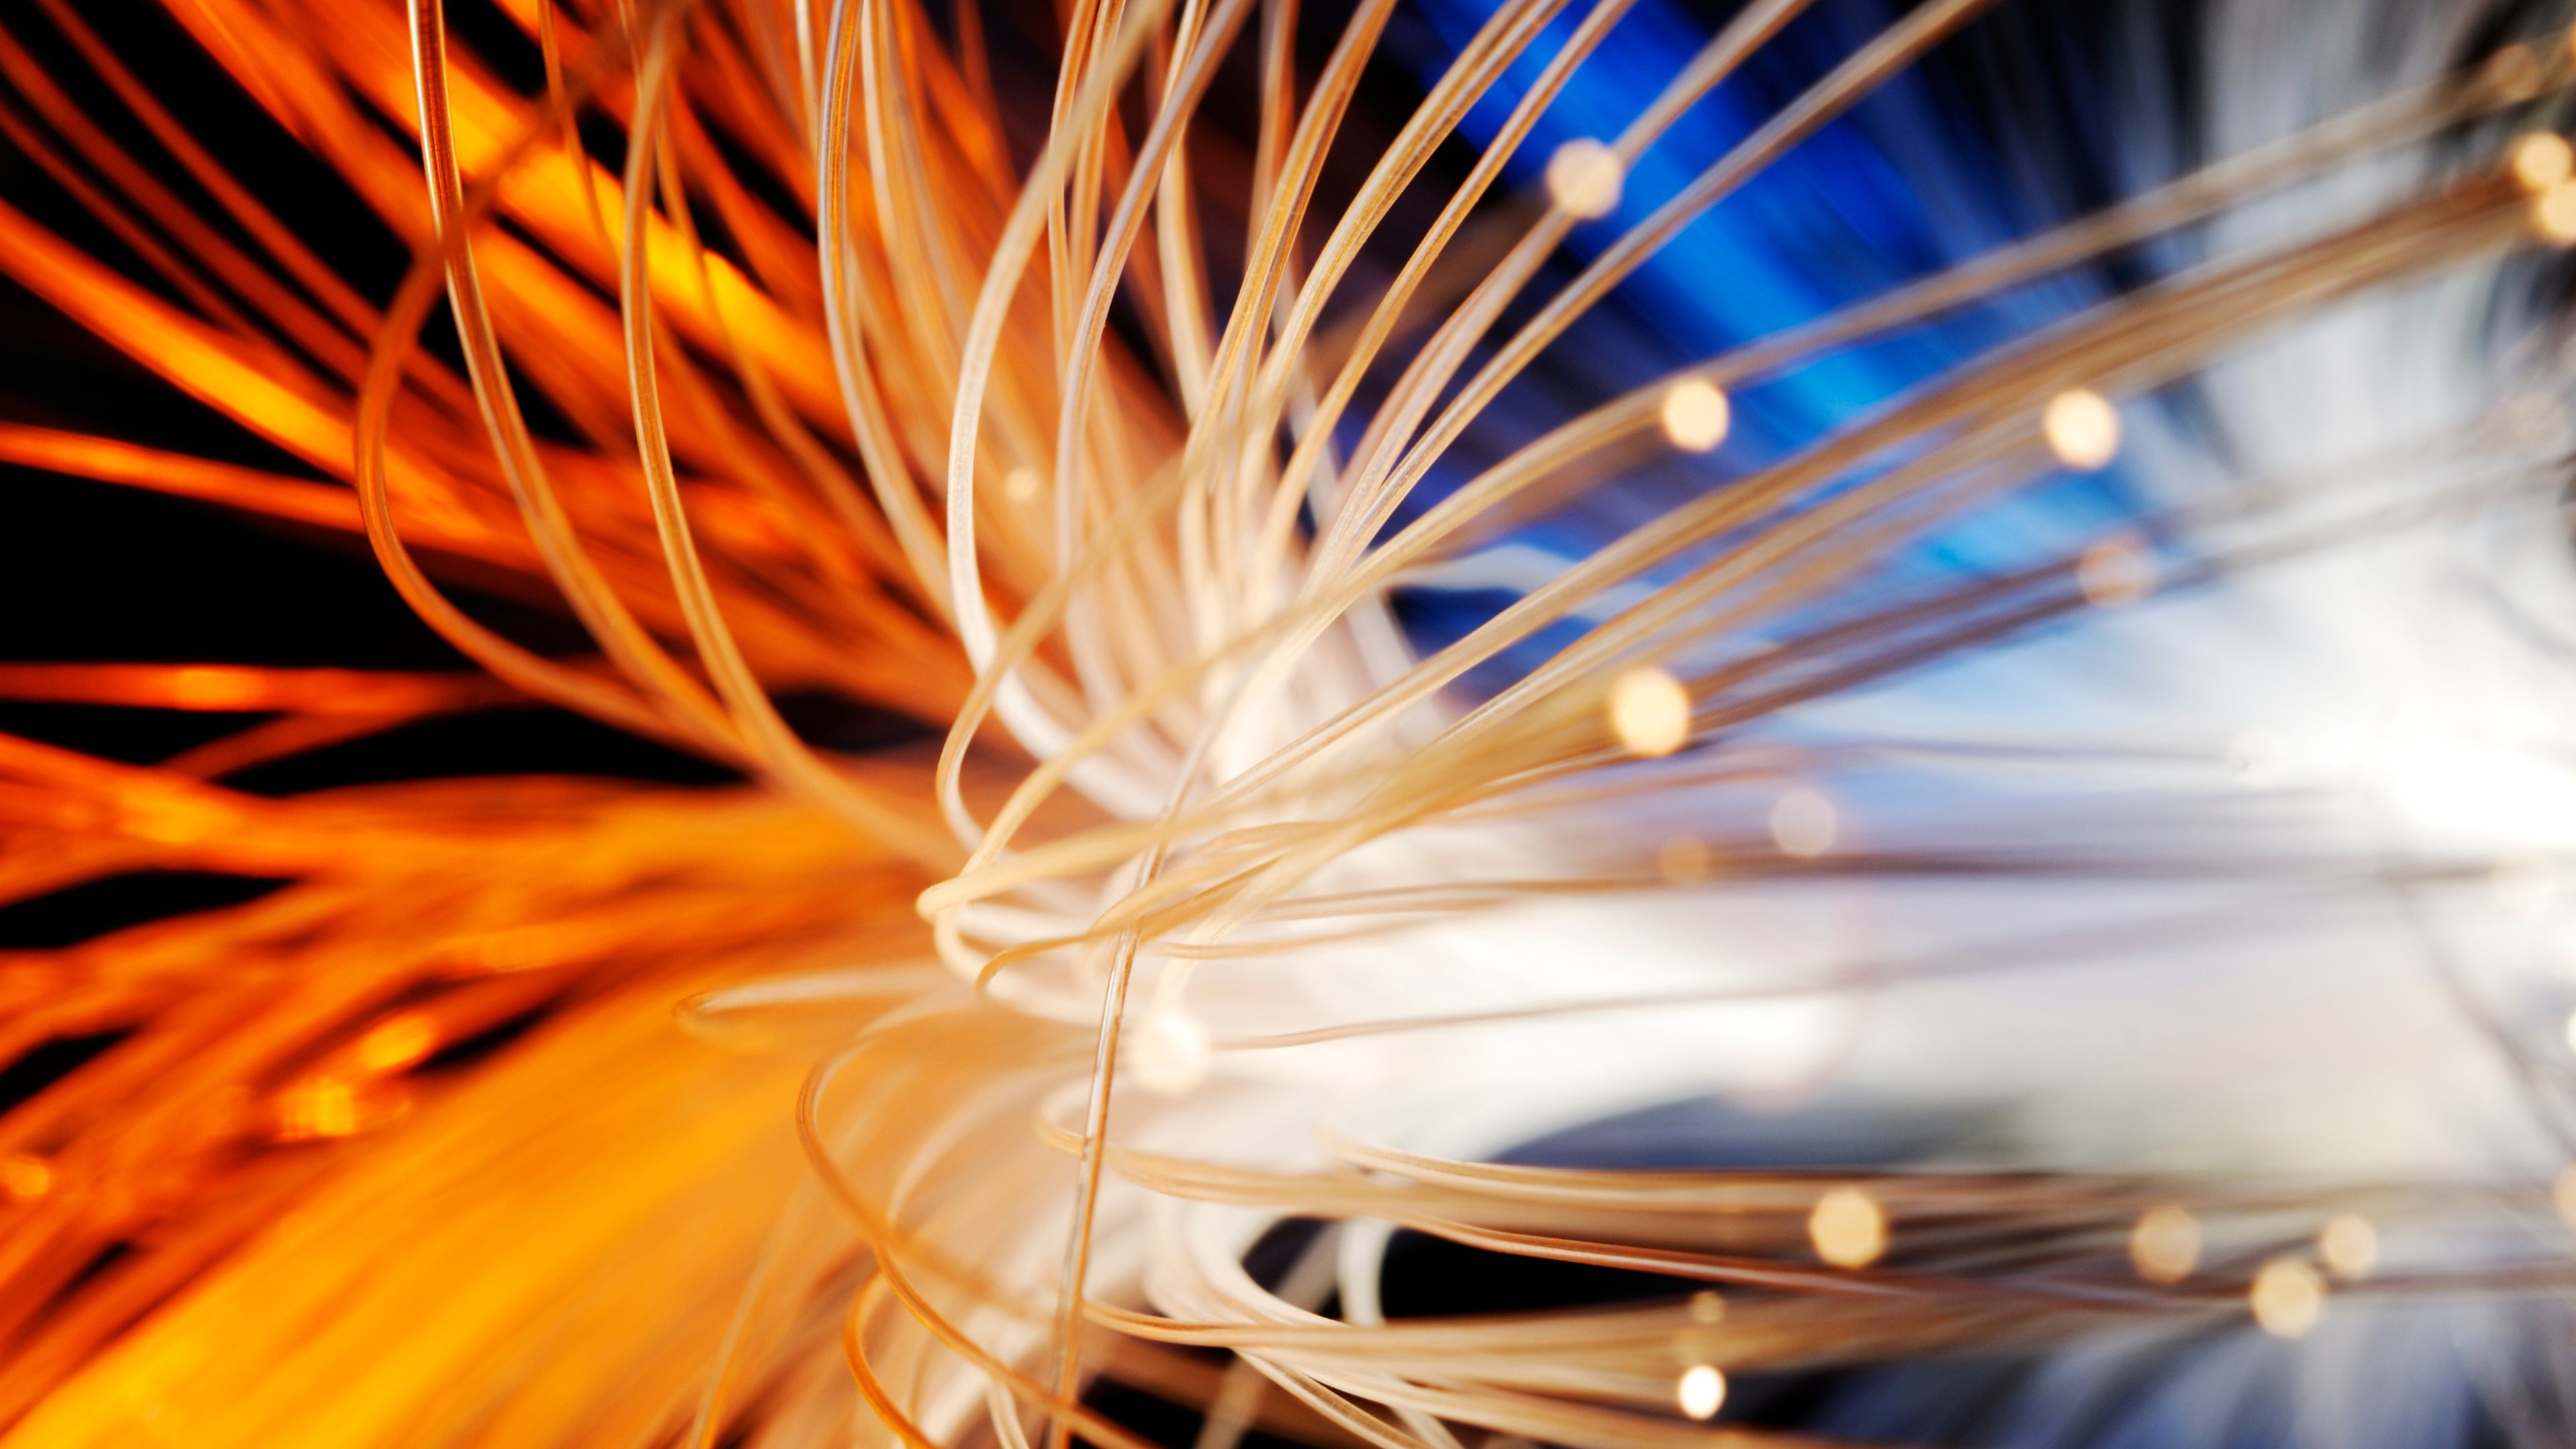 Light signals traveling through fiber optic cables. Shallow depth of field differential focus